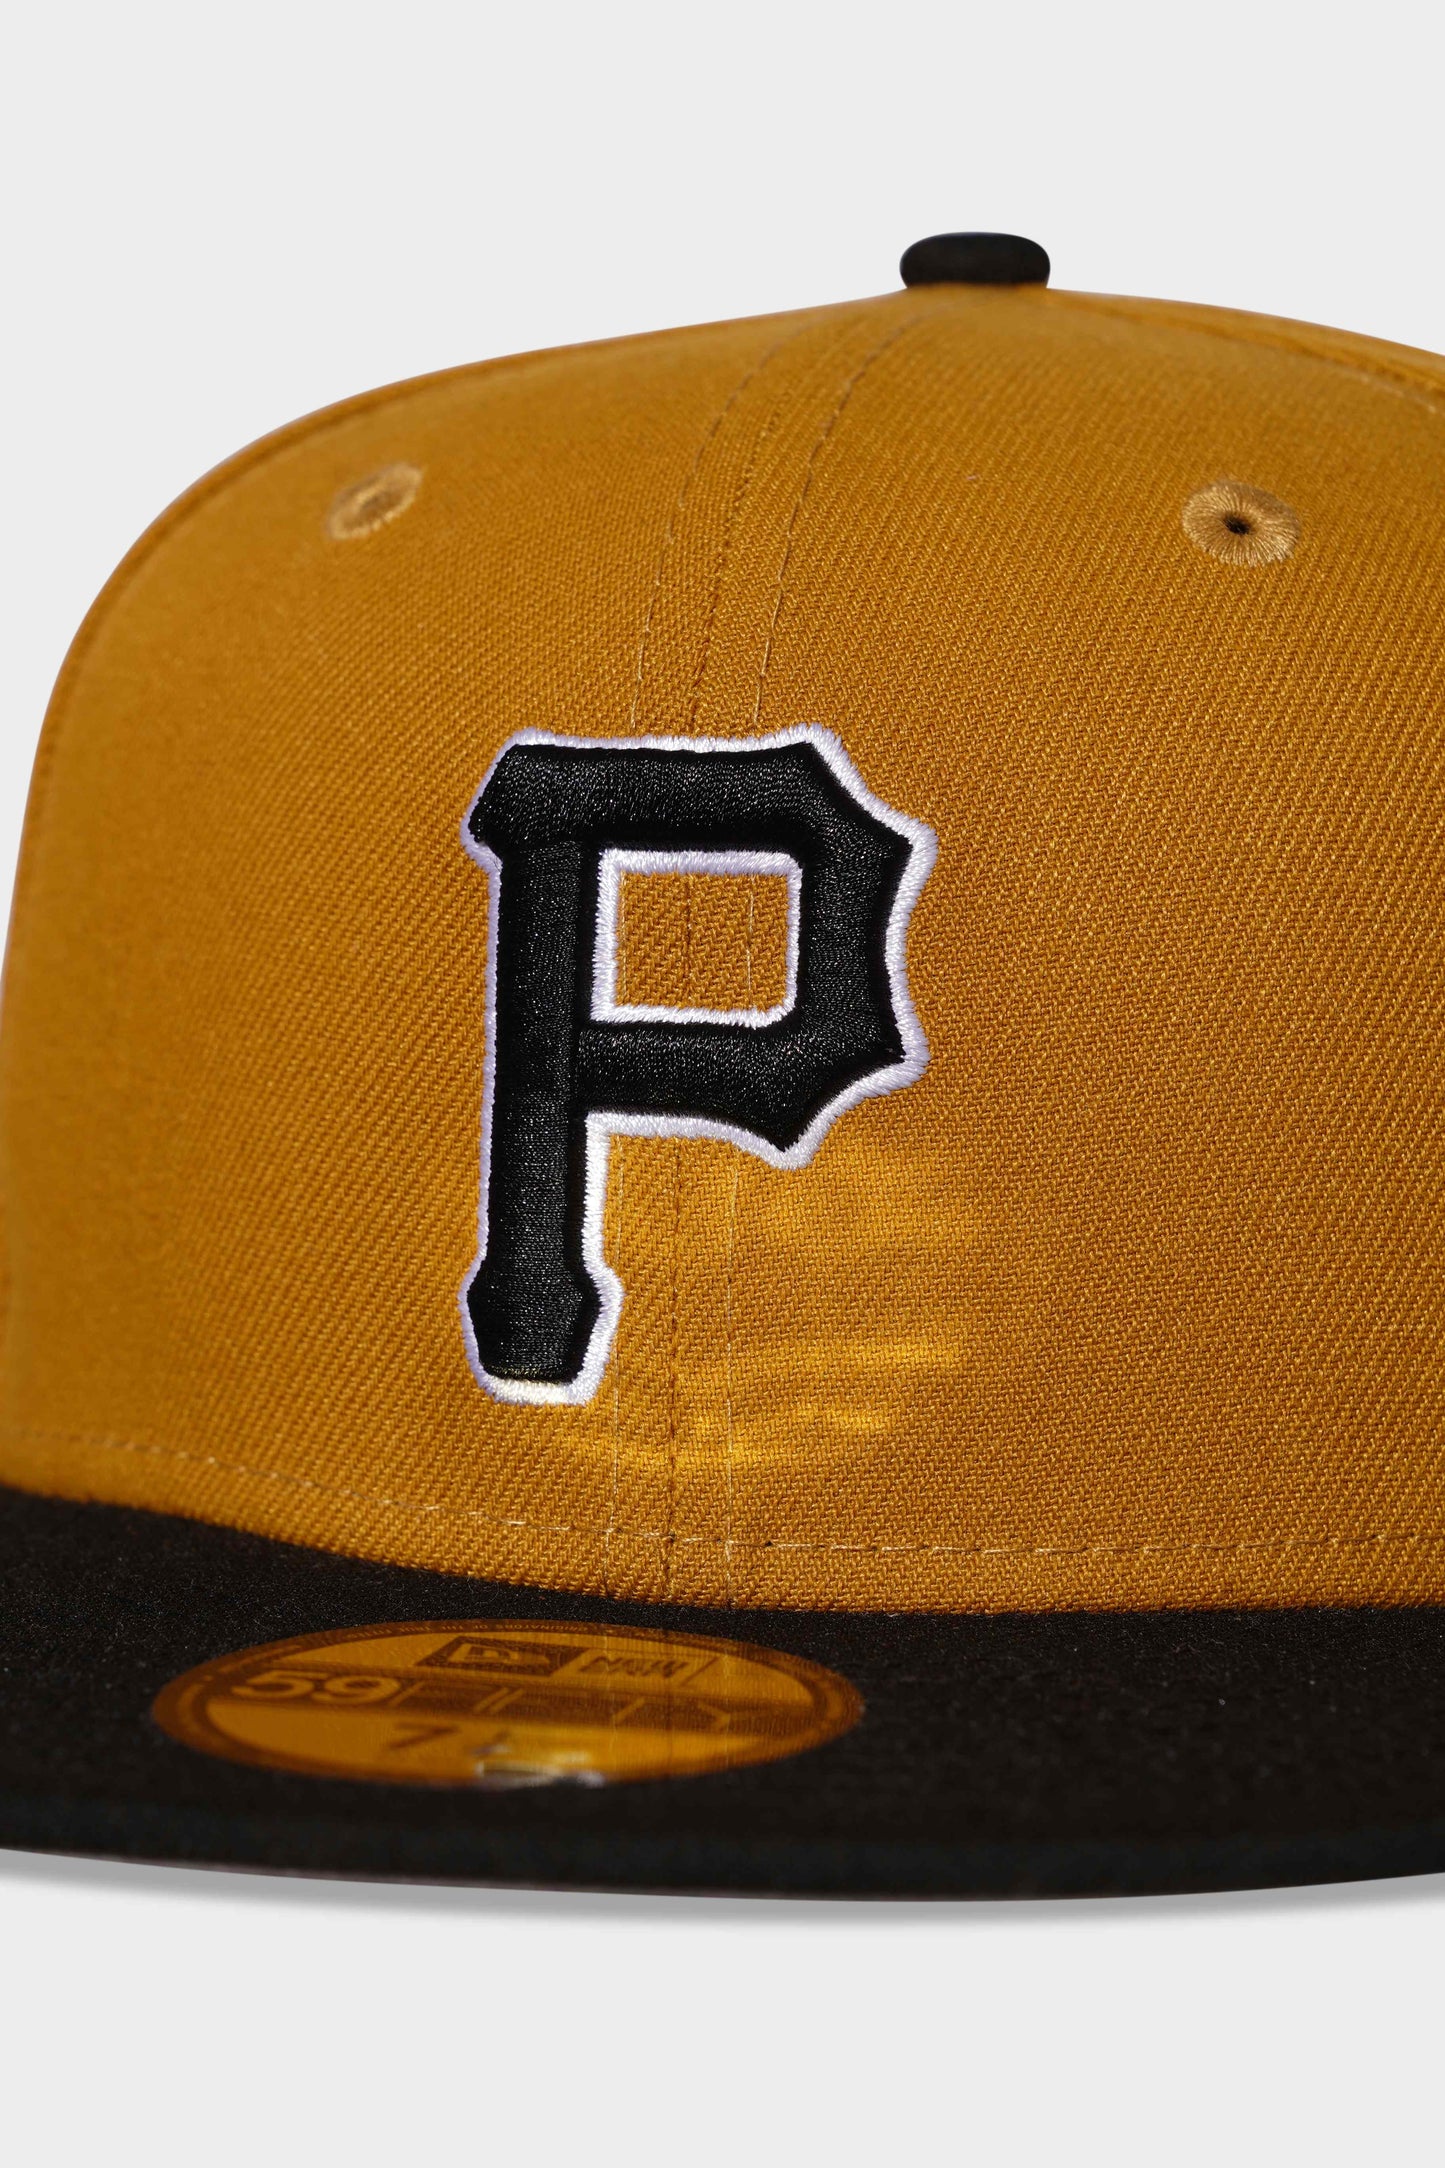 New Era 5950 Pittsburgh Pirates Vintage Gold Fitted